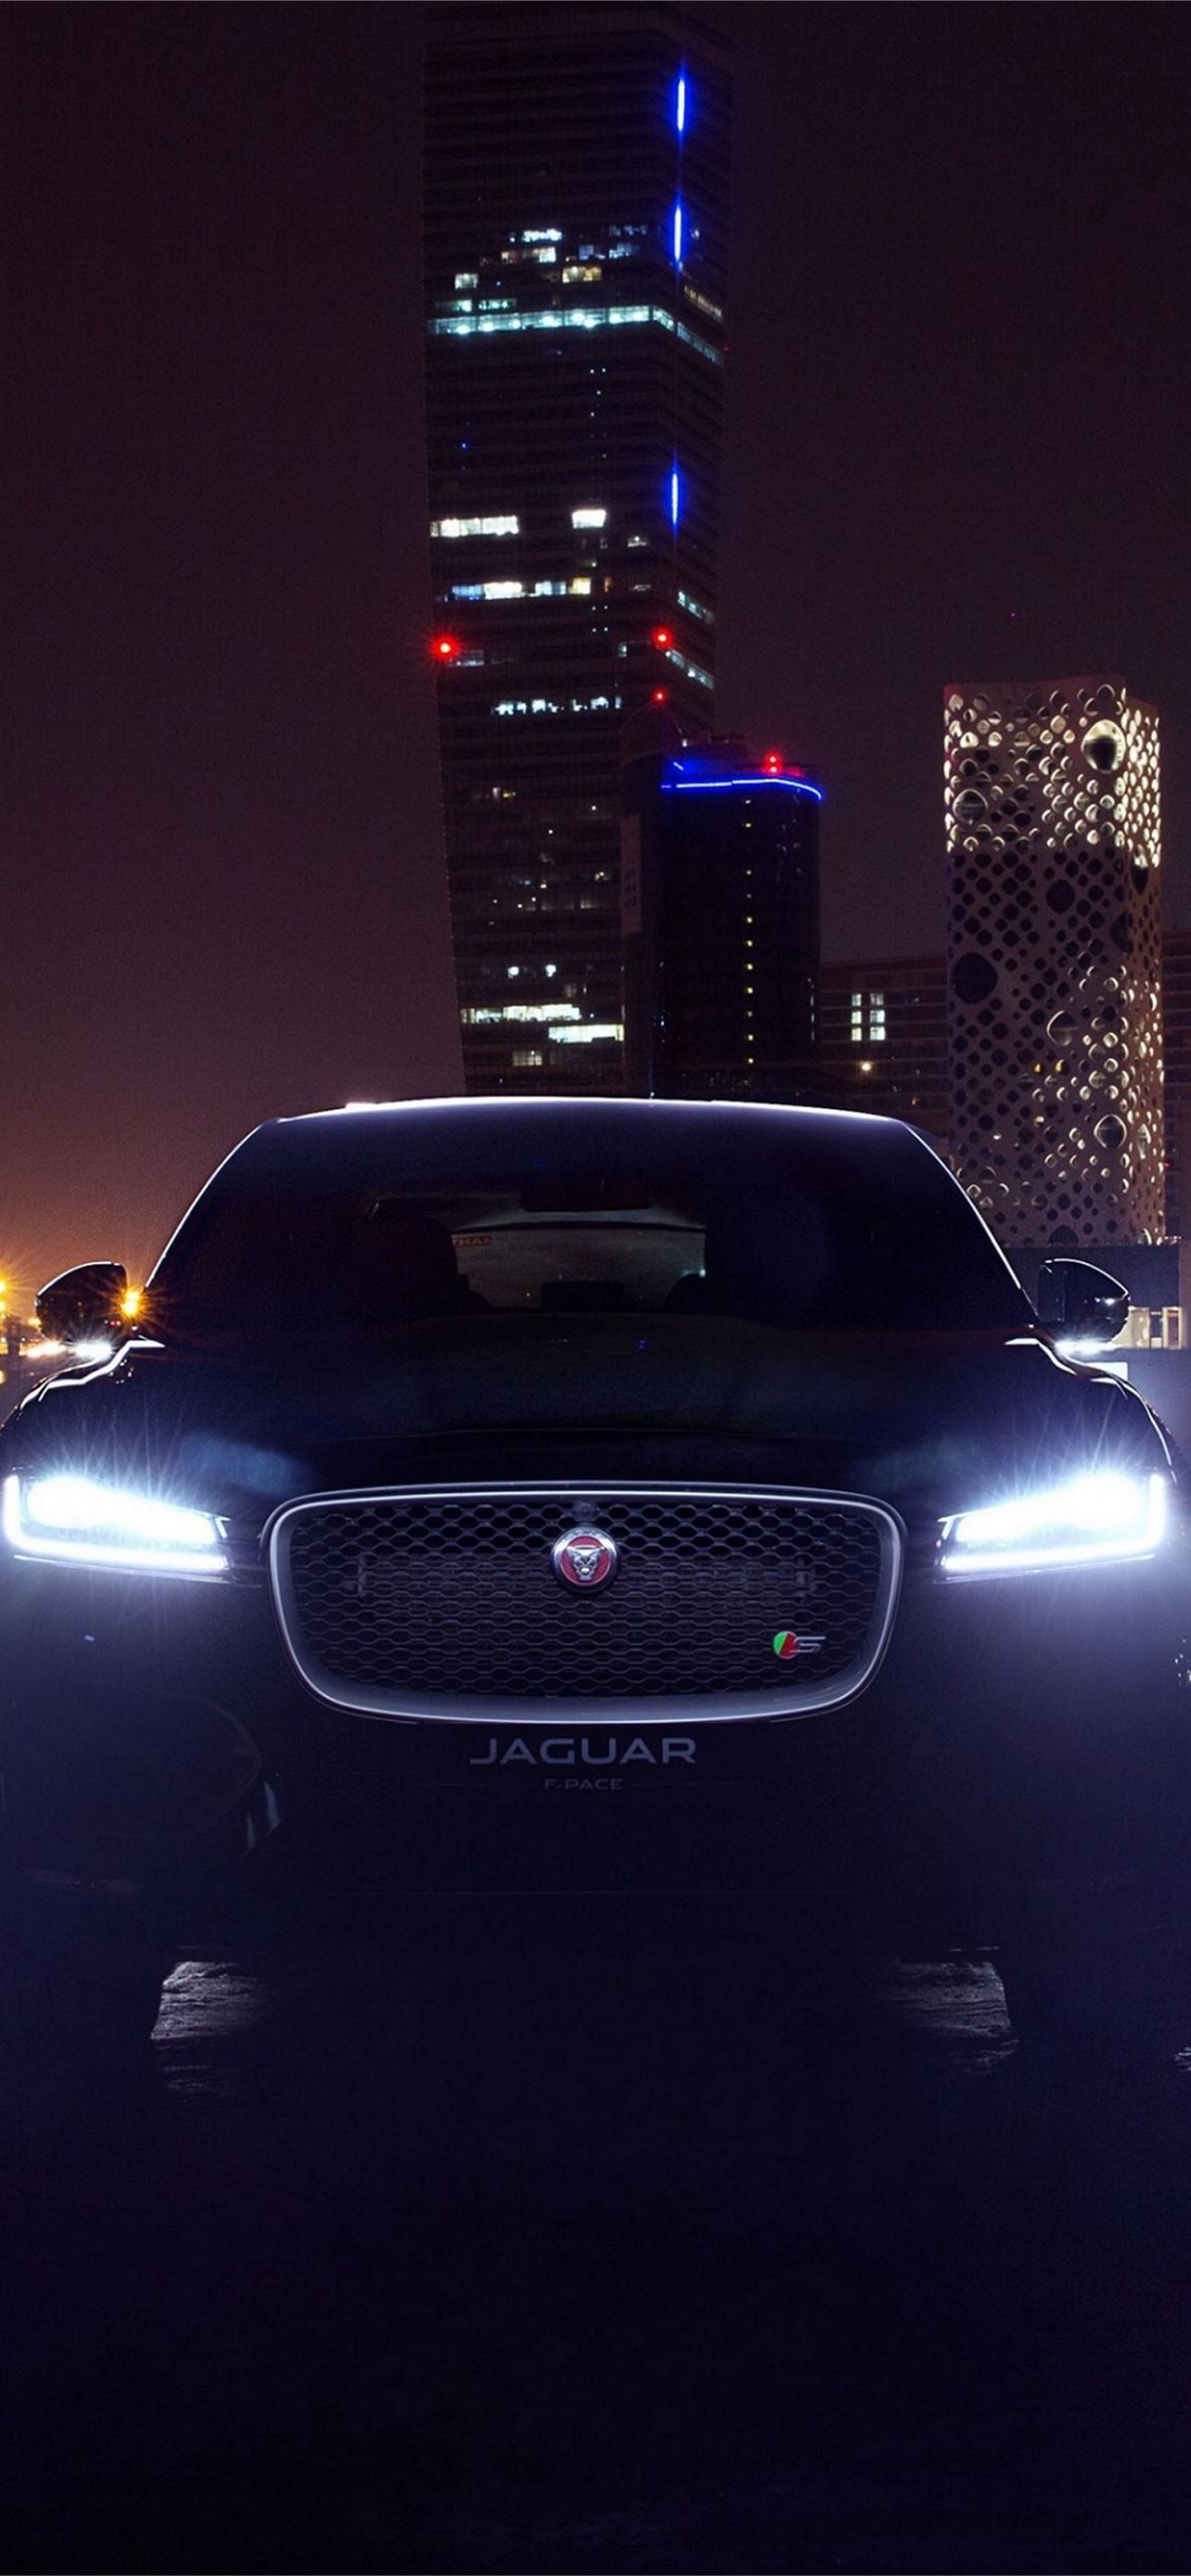 Jaguar Car posted by Ryan Sellers iPhone Wallpapers Free Download